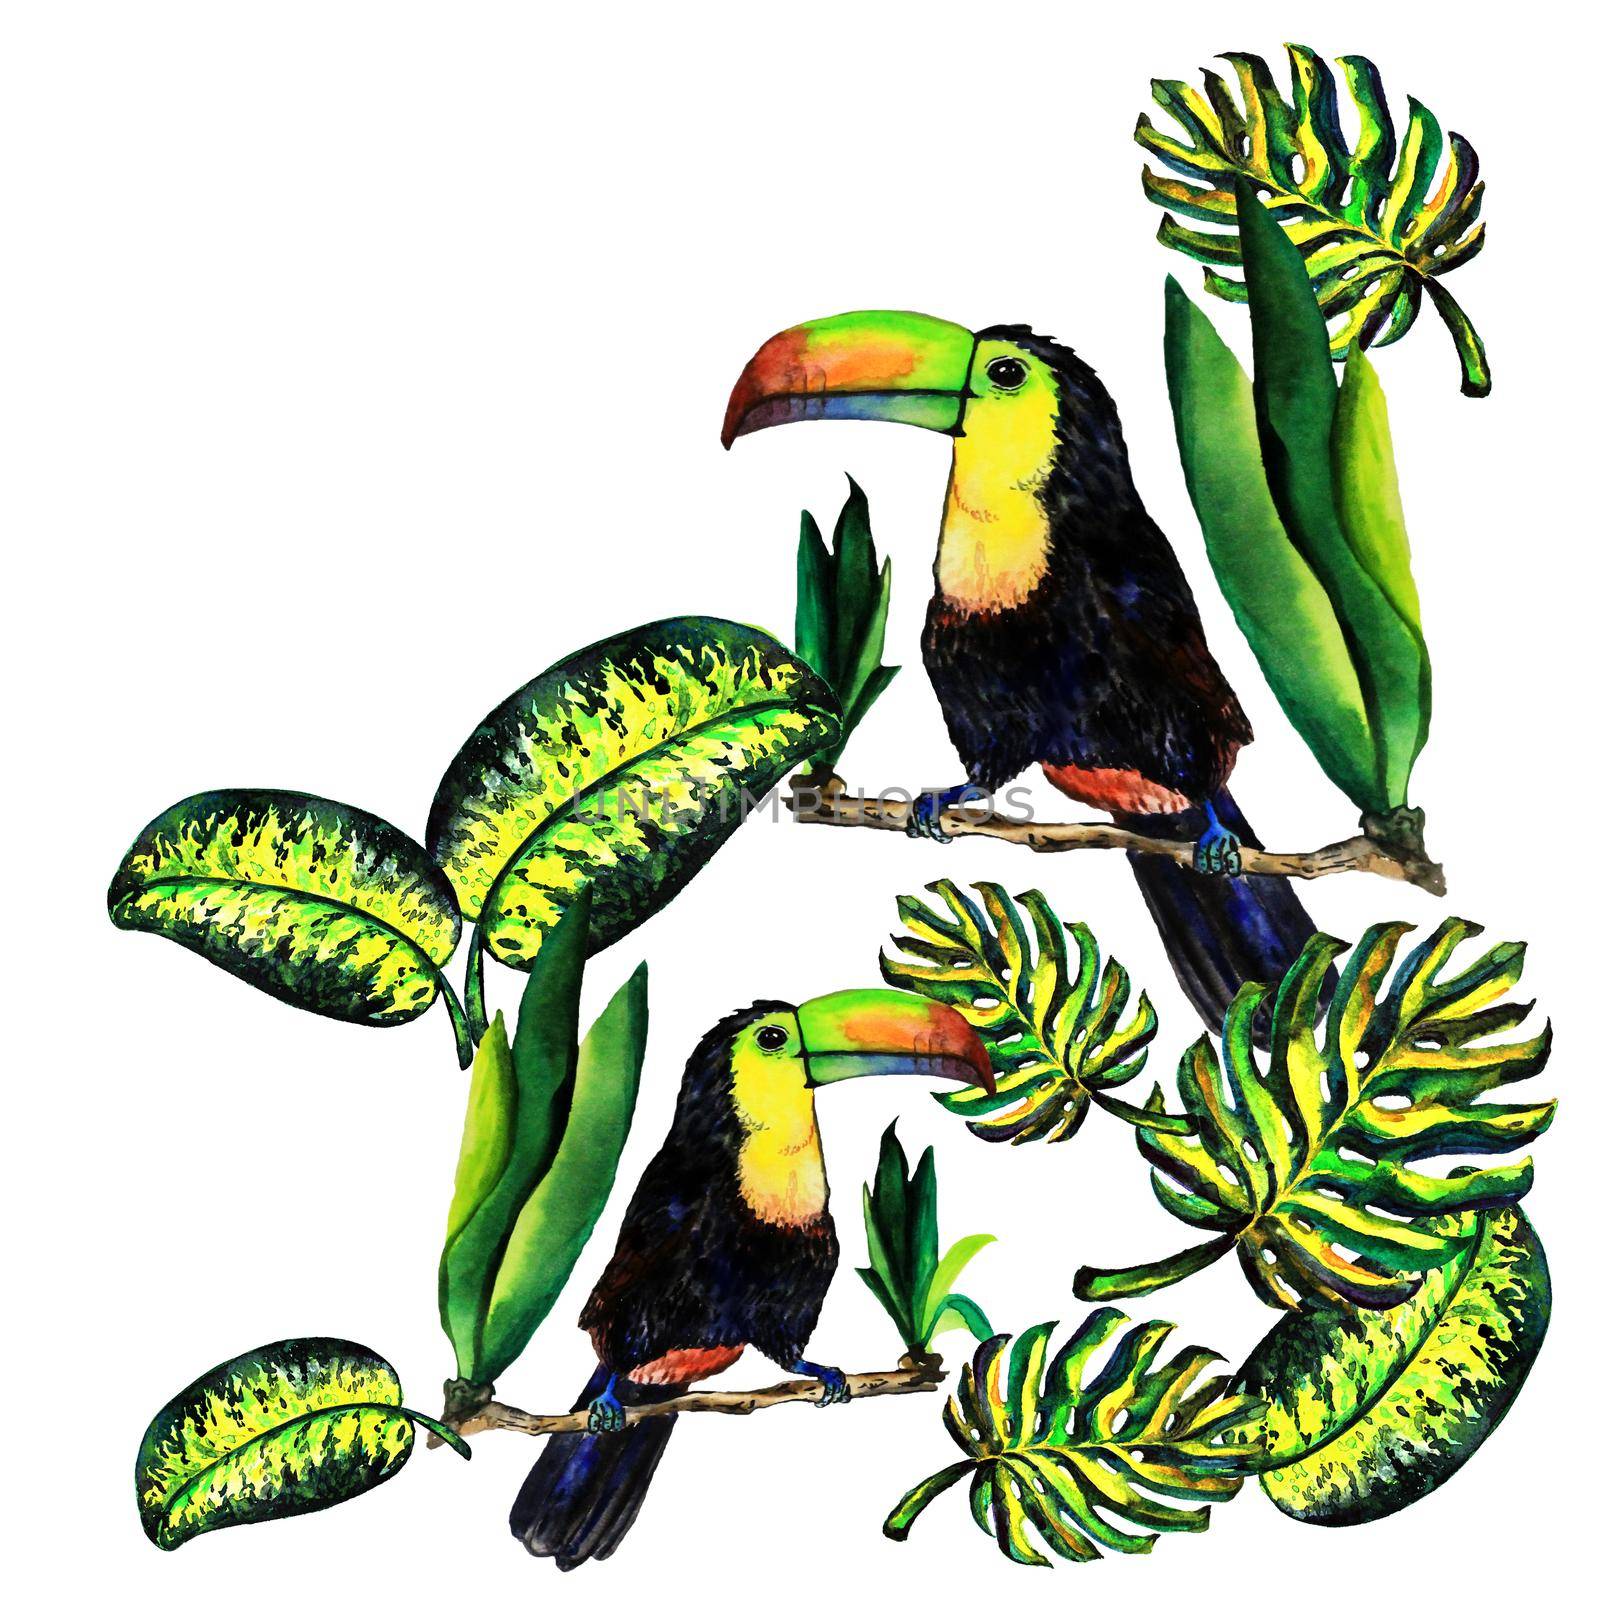 Greeting card of leaves monstera and Toucan. Watercolor